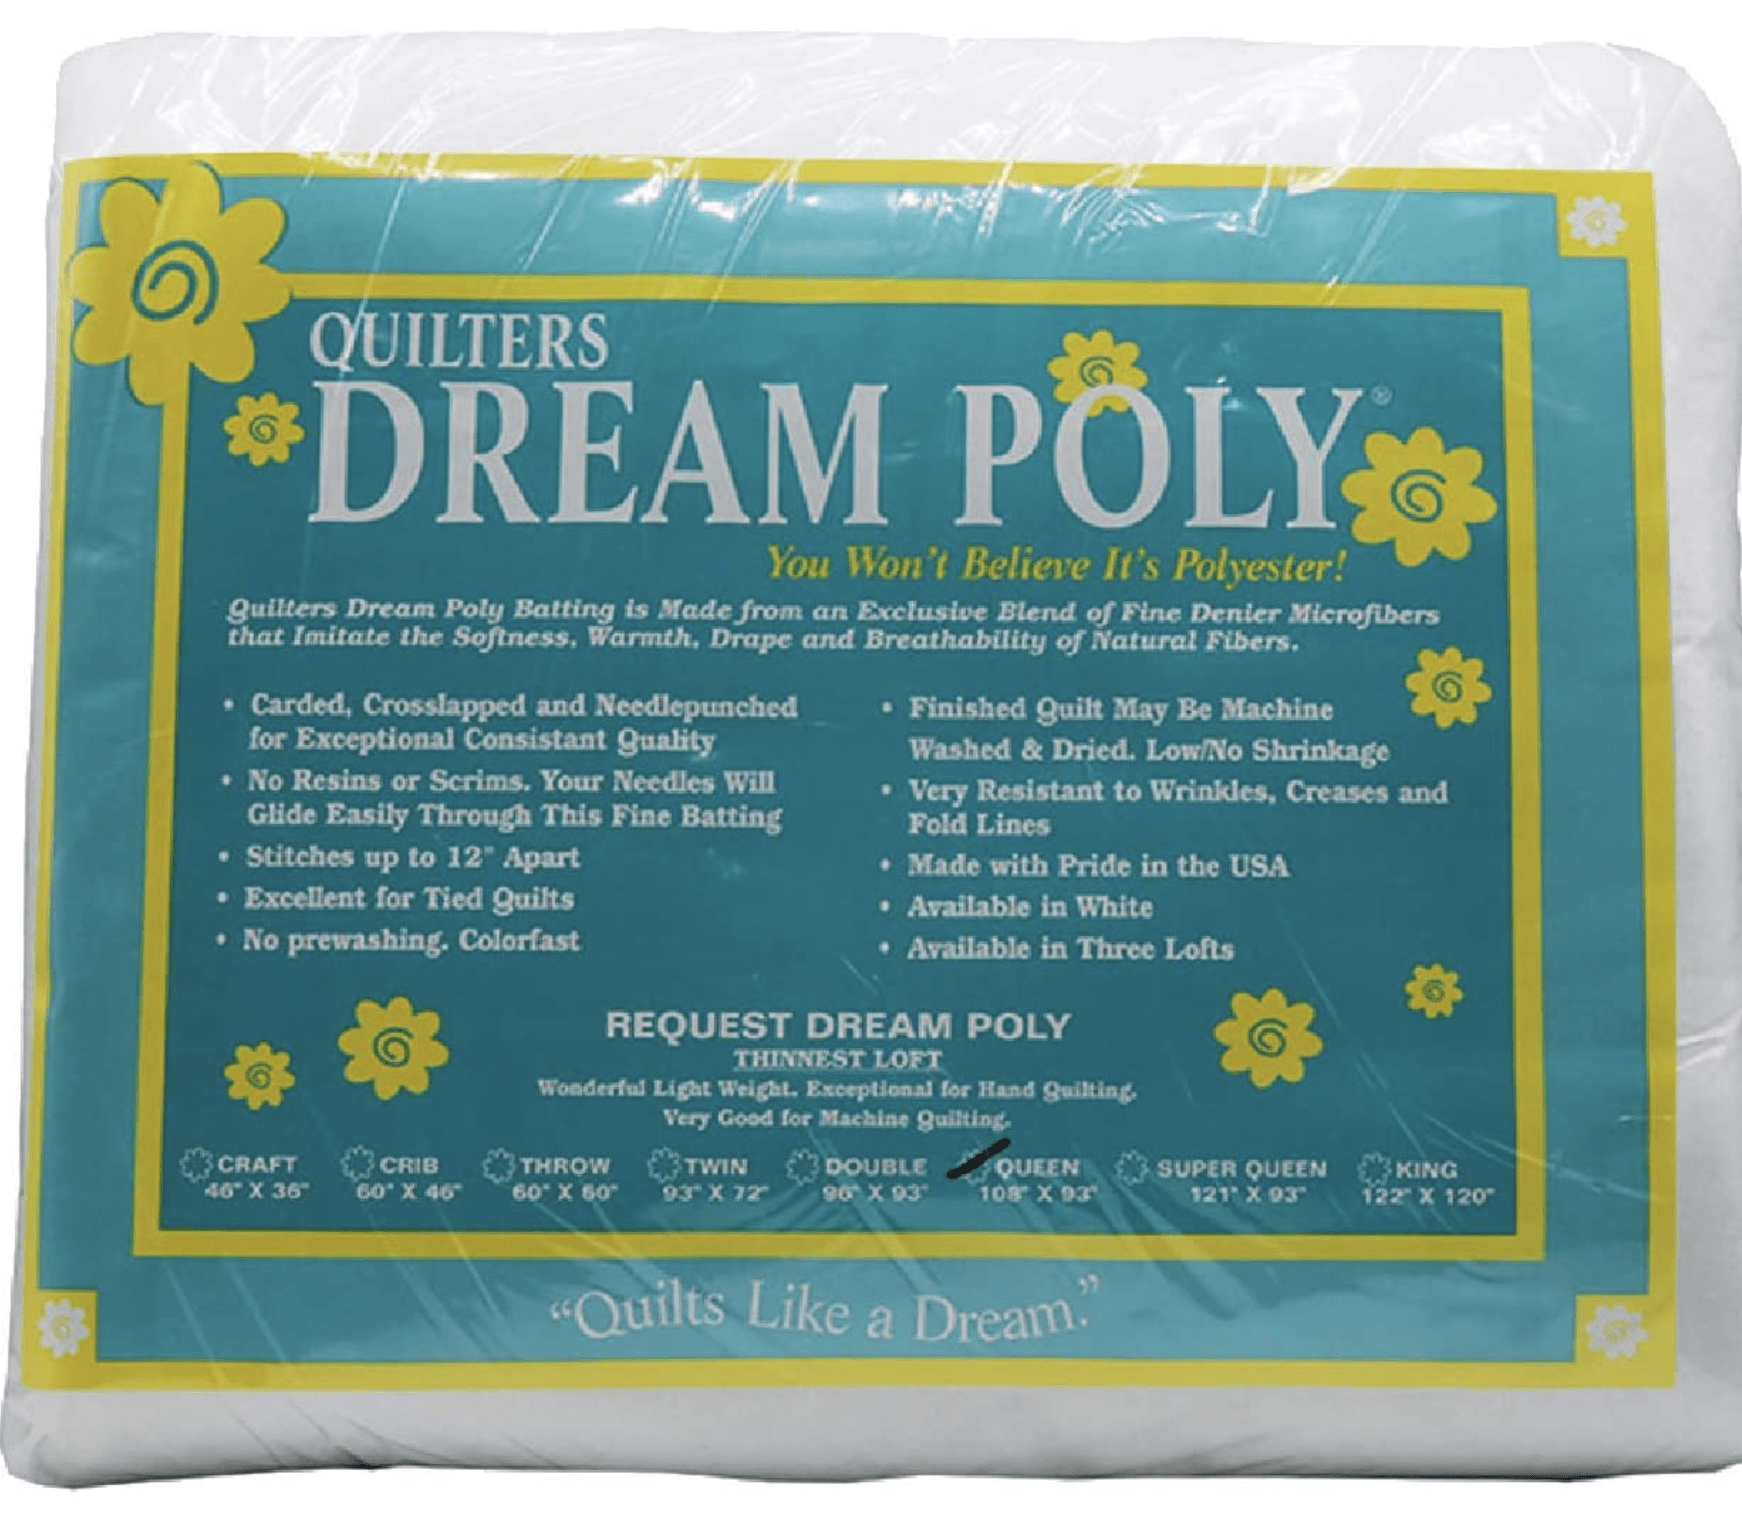 Pellon Nature&s Touch White Cotton Packaged Batting, Available in, Size: Queen